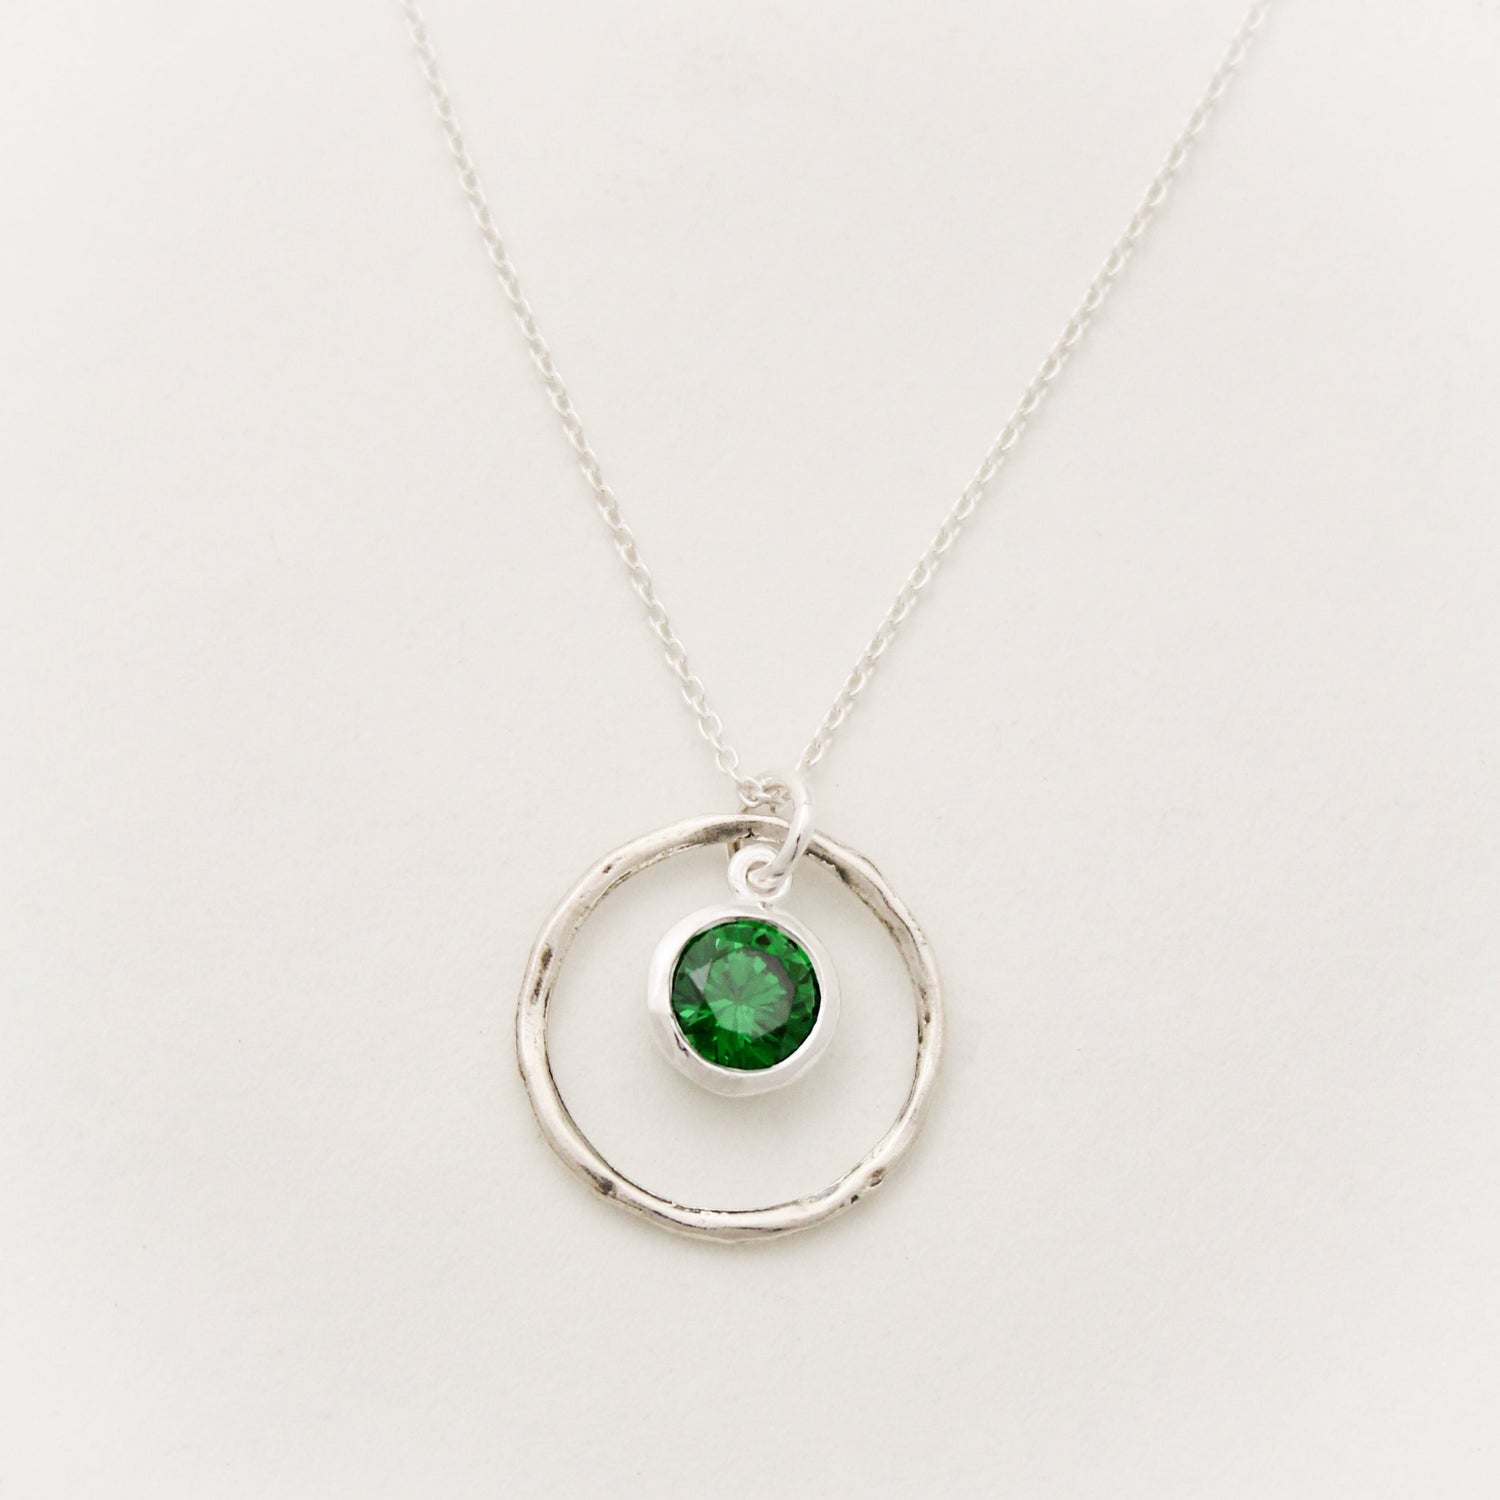 May Birthstone Necklace, May Emerald Jewelry, May Birthday Gift, May Birthstone Jewelry, Emerald Necklace, Sterling Silver Emerald Jewelry